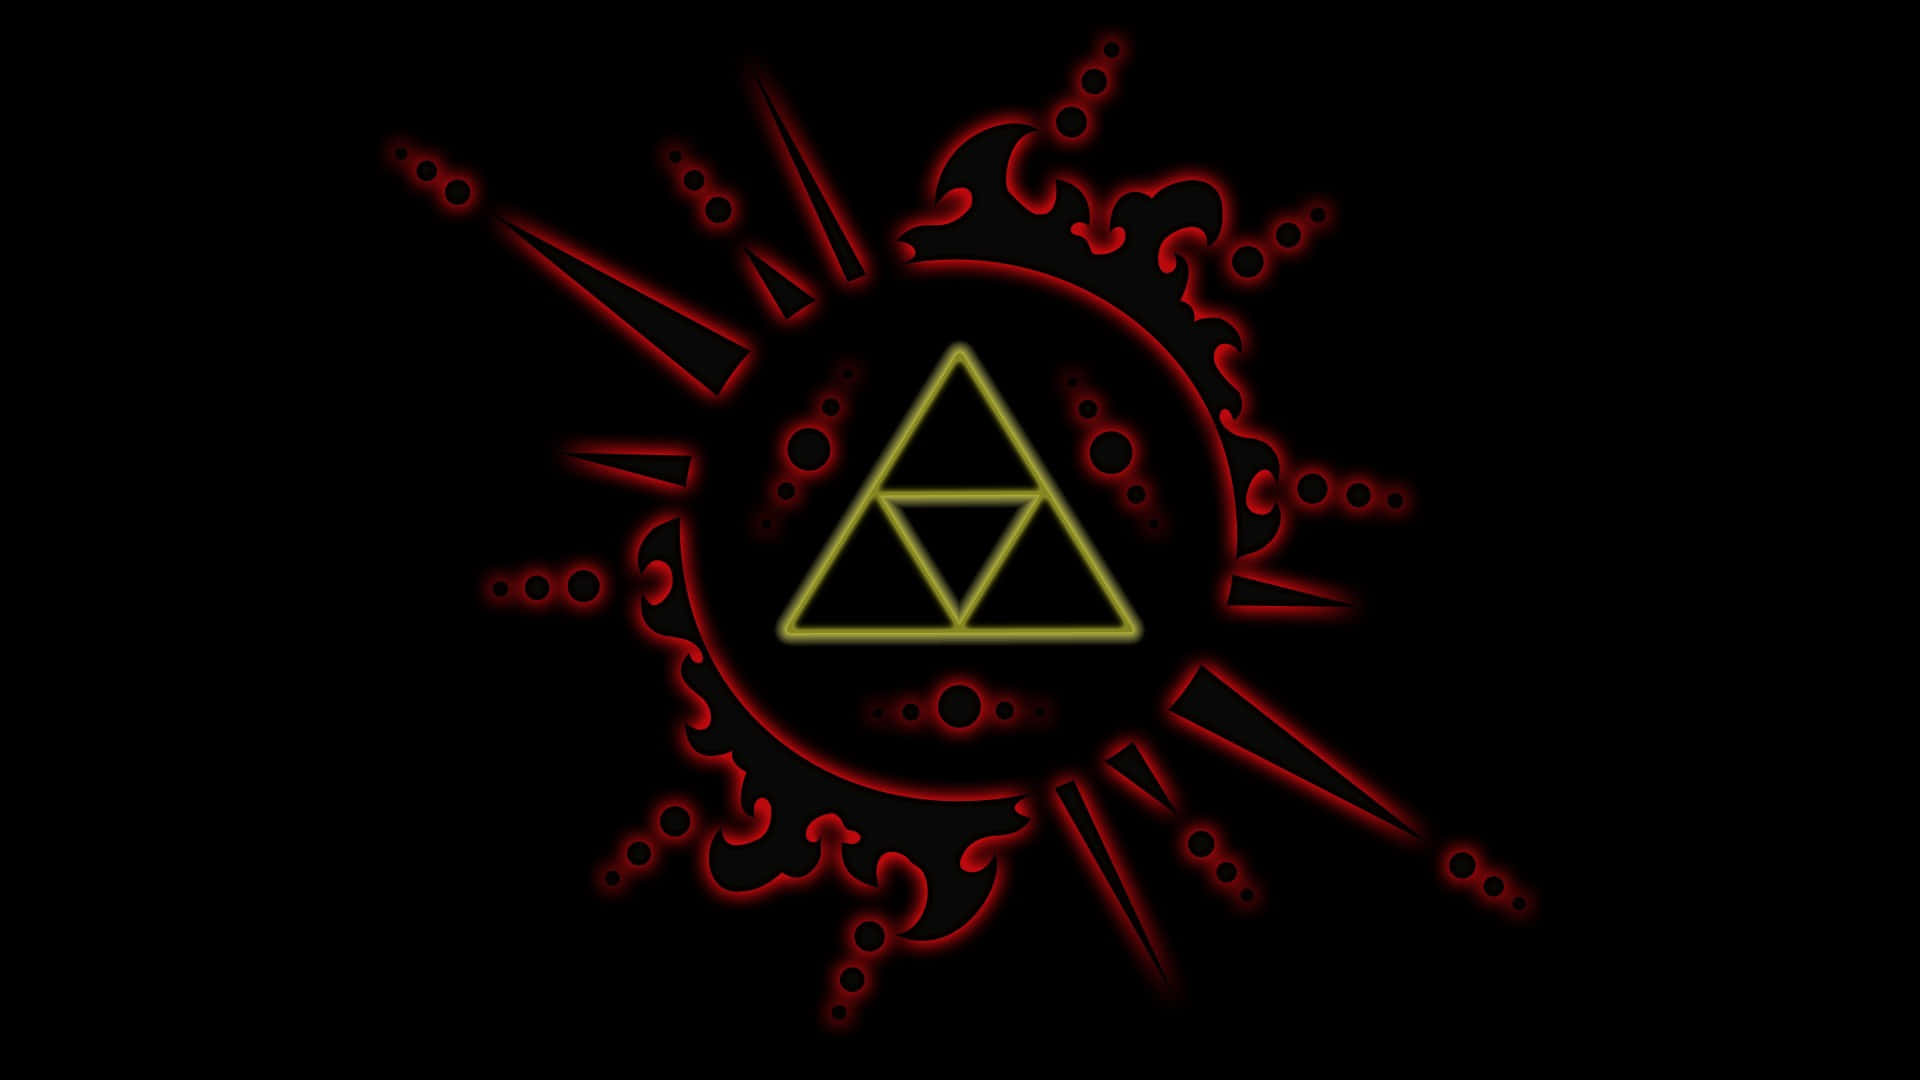 The Triforce: A Symbol Of Power, Wisdom And Courage Background